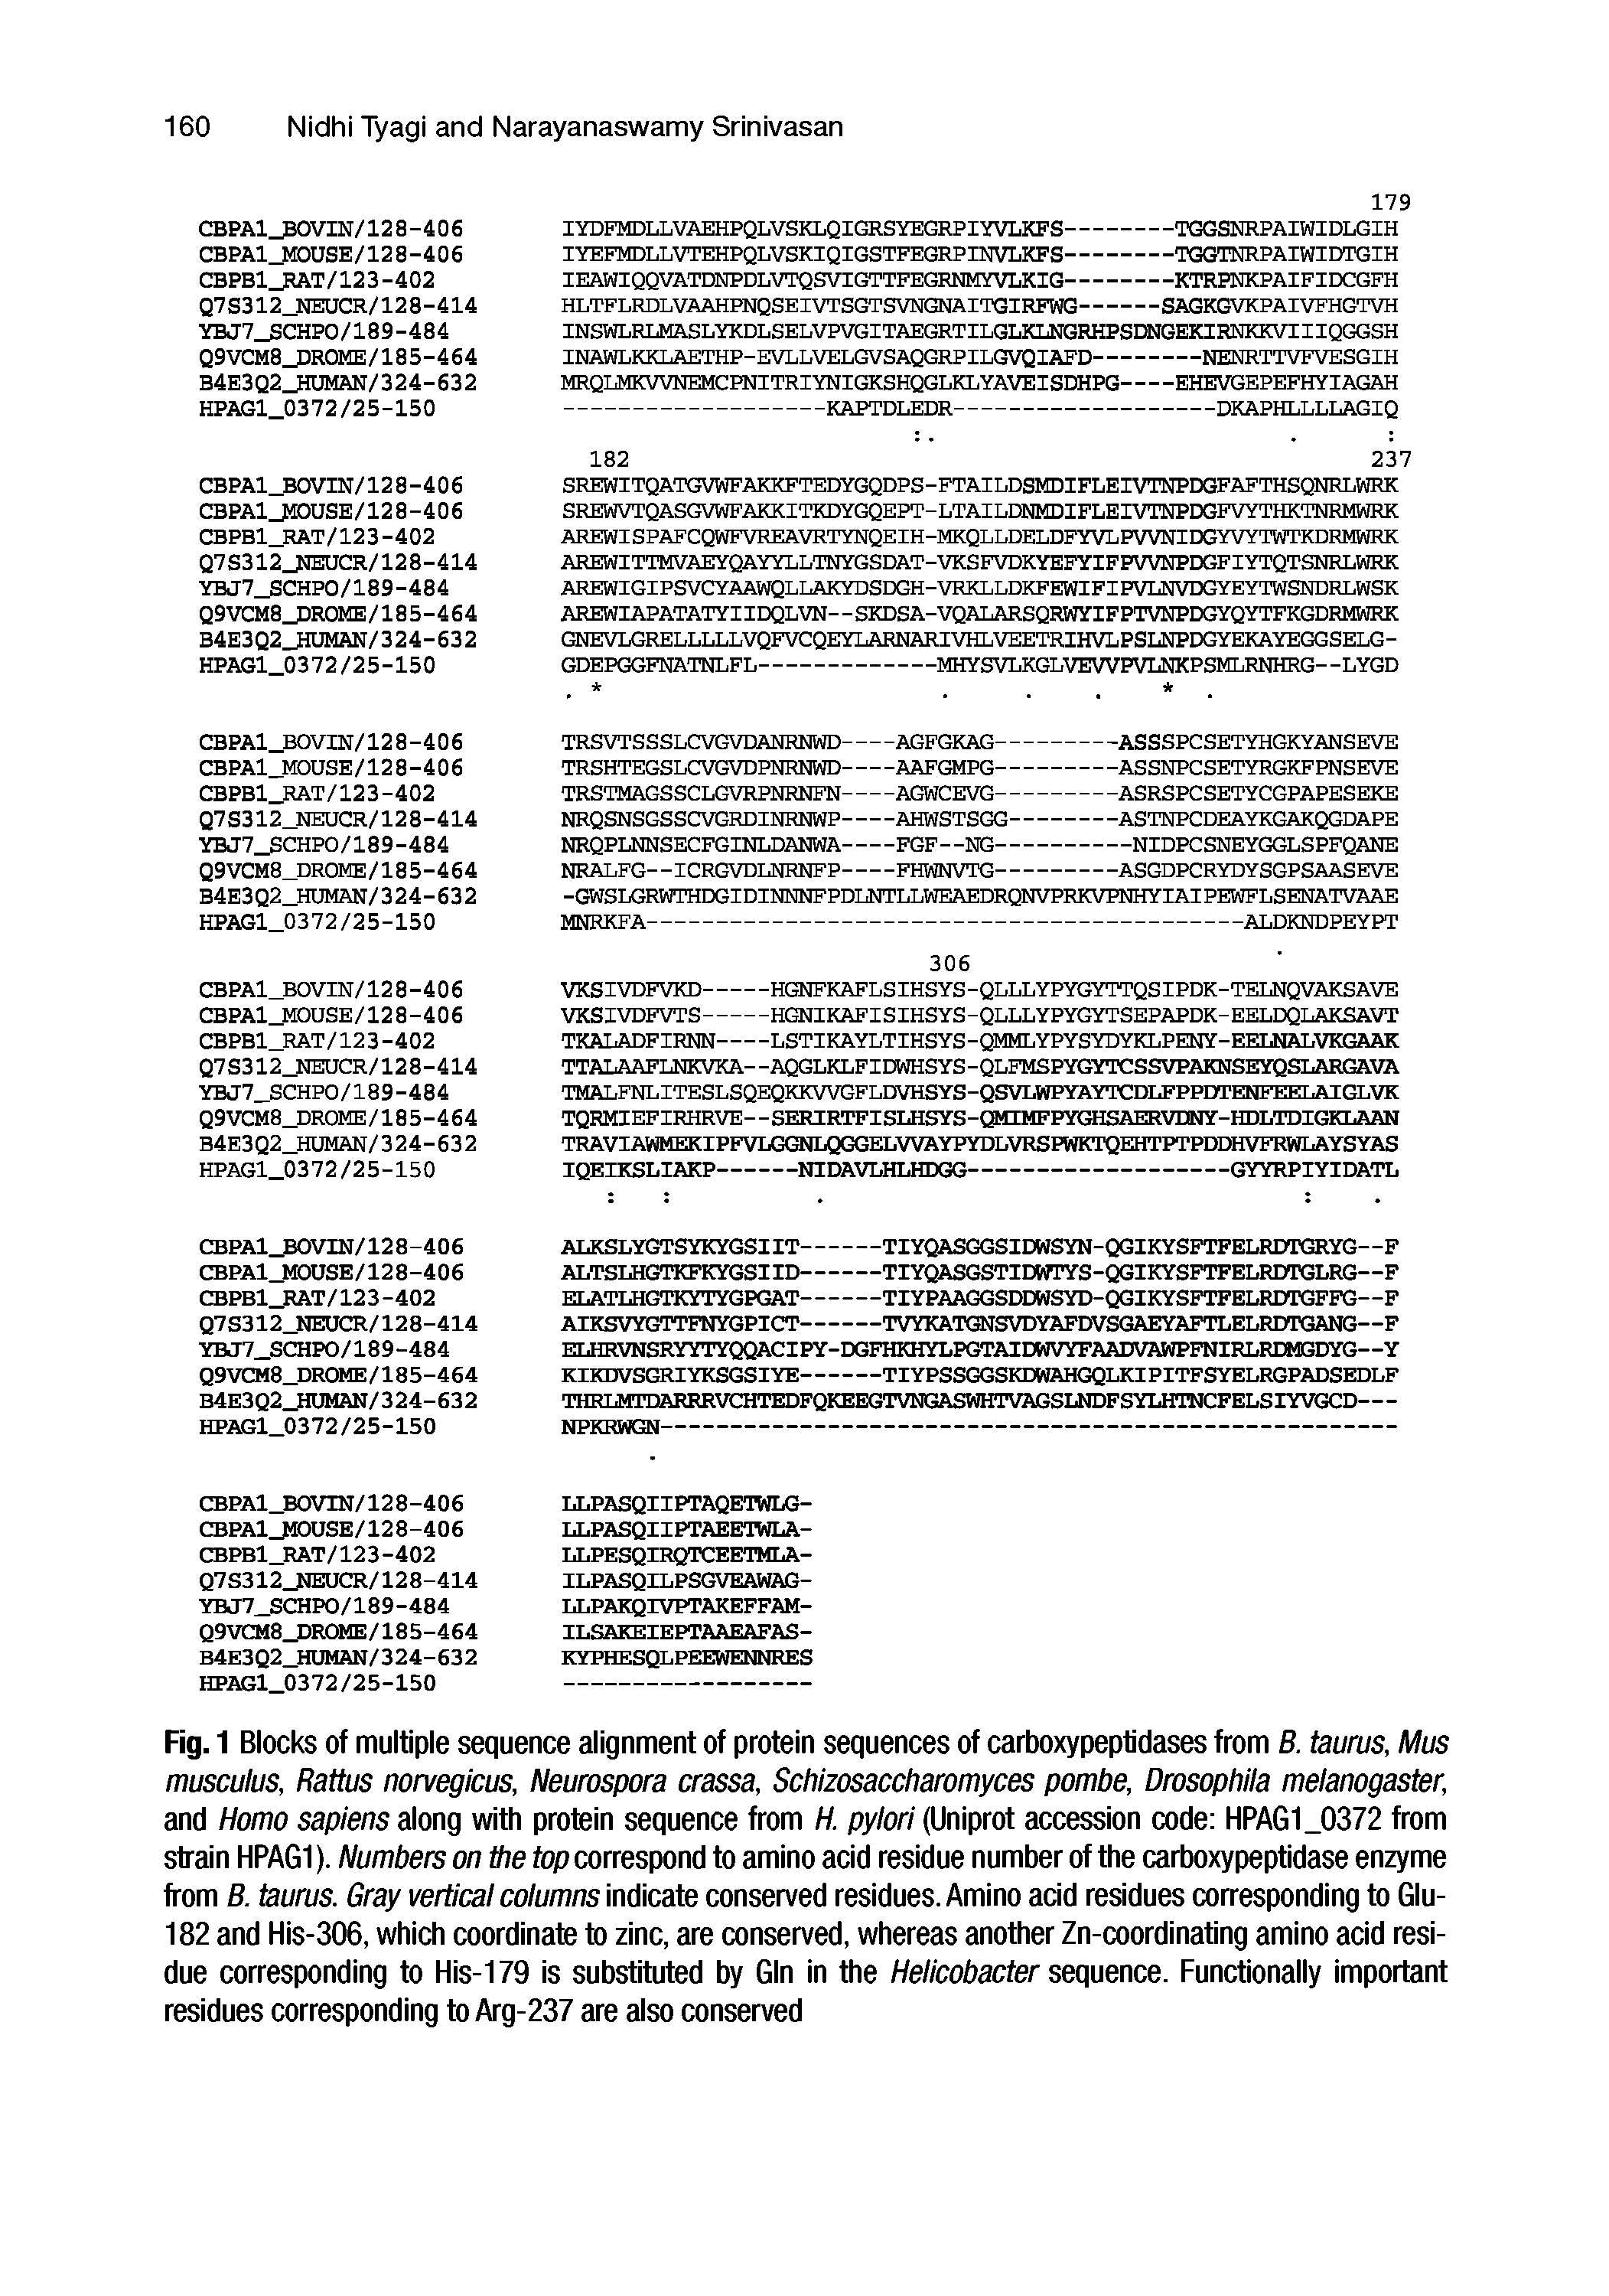 Fig. 1 Blocks of multiple sequence alignment of protein sequences of carboxypeptidases from B. taurus, Mus musculus, Rattus norvegicus, Neurospora crassa, Schizosaccharomyces pombe, Drosophila melanogaster, and Homo sapiens along with protein sequence from H. pylori (Uniprot accession code HPAG1 0372 from strain HPAG1). Numbers on the top correspond to amino acid residue number of the carboxypeptidase enzyme from B. taurus. Gray vertical columns indicate conserved residues. Amino acid residues corresponding to Glu-182 and His-306, which coordinate to zinc, are conserved, whereas another Zn-coordinating amino acid residue corresponding to His-179 is substituted by Gin in the Helicobacter sequence. Functionally important residues corresponding to Arg-237 are also conserved...